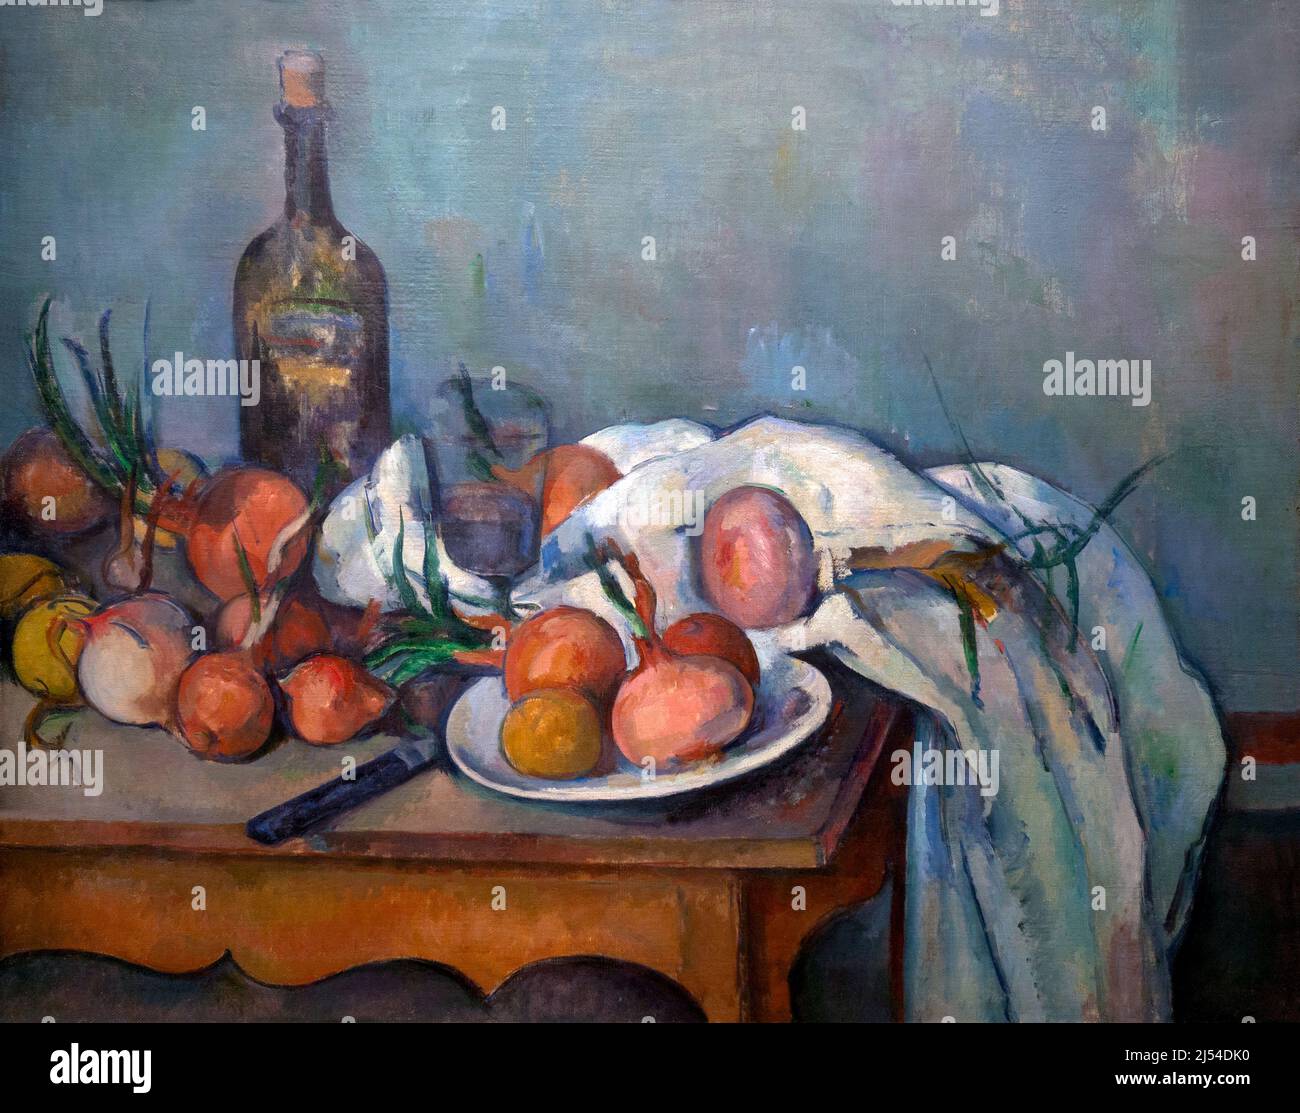 Still Life with Onions, Nature Morte aux Oignons, Paul Cezanne, 1895, Musee D'Orsay, Paris, France, Europe Stock Photo